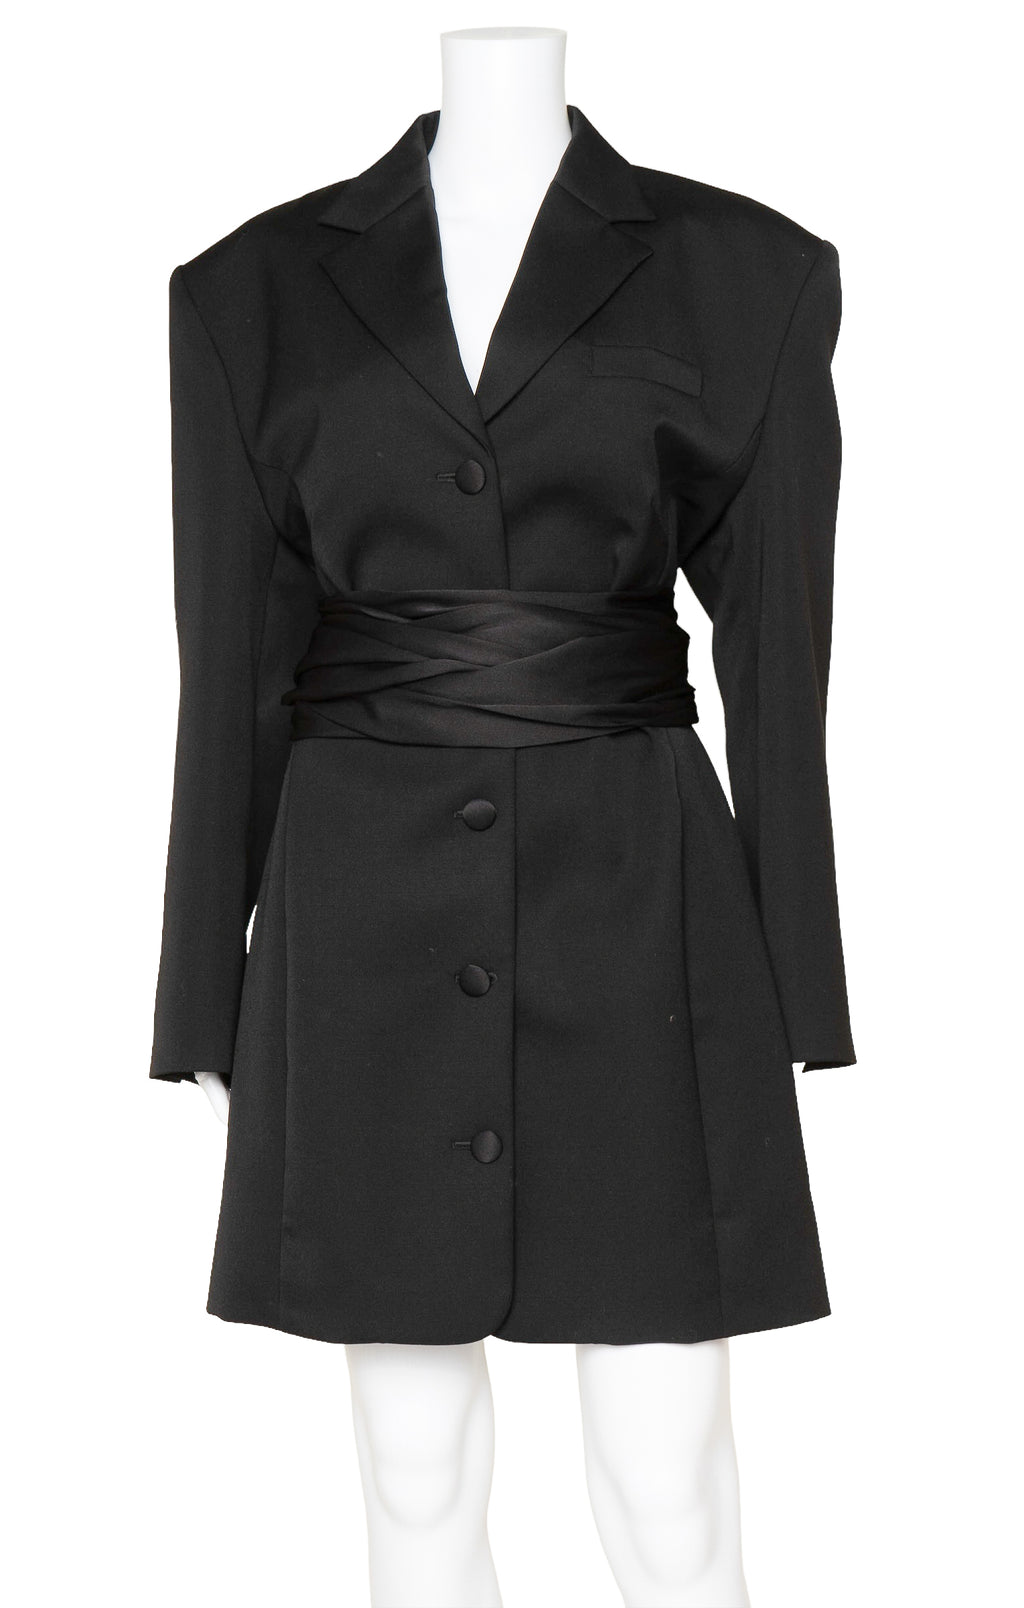 MAGDA BUTRYM Dress / Jacket Size: FR 40 / Comparable to US 6-8